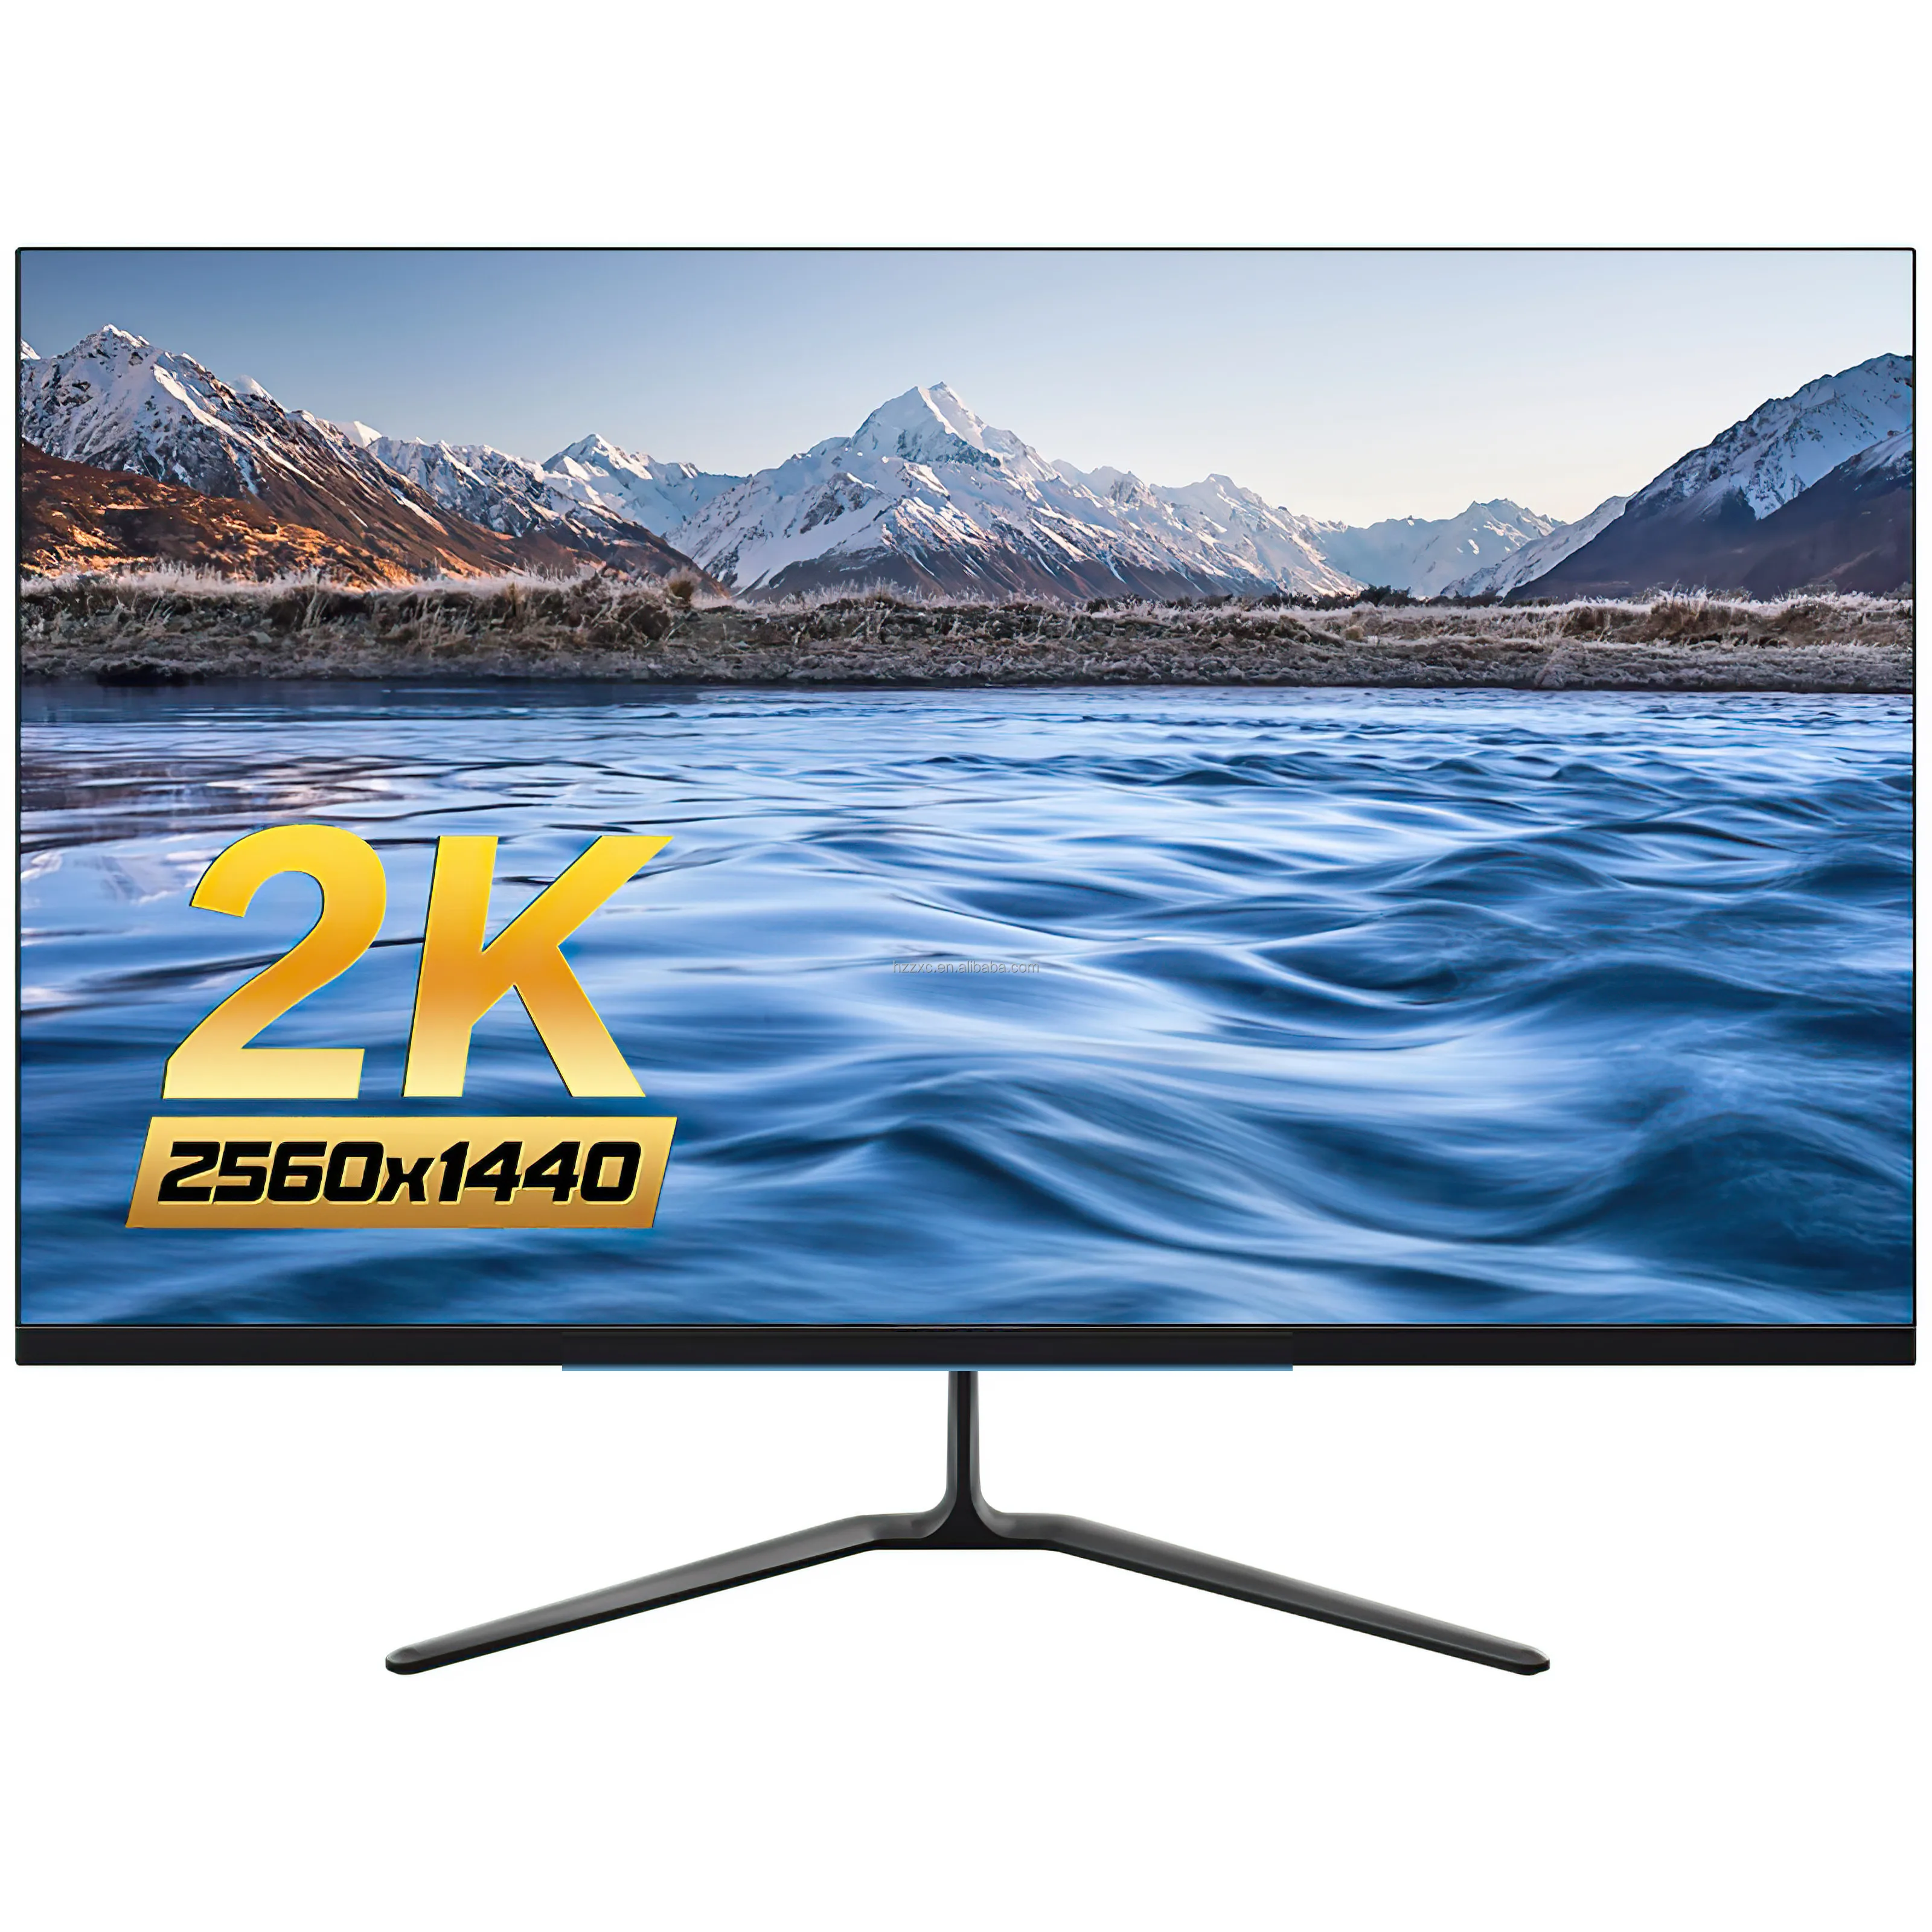 Enlarge 32 inch 2K 60Hz Gaming Computer Monitor W220A   IPS With Narrow Bezel, Wide Viewing Angle, For Esports Office, HD LCD  Screen